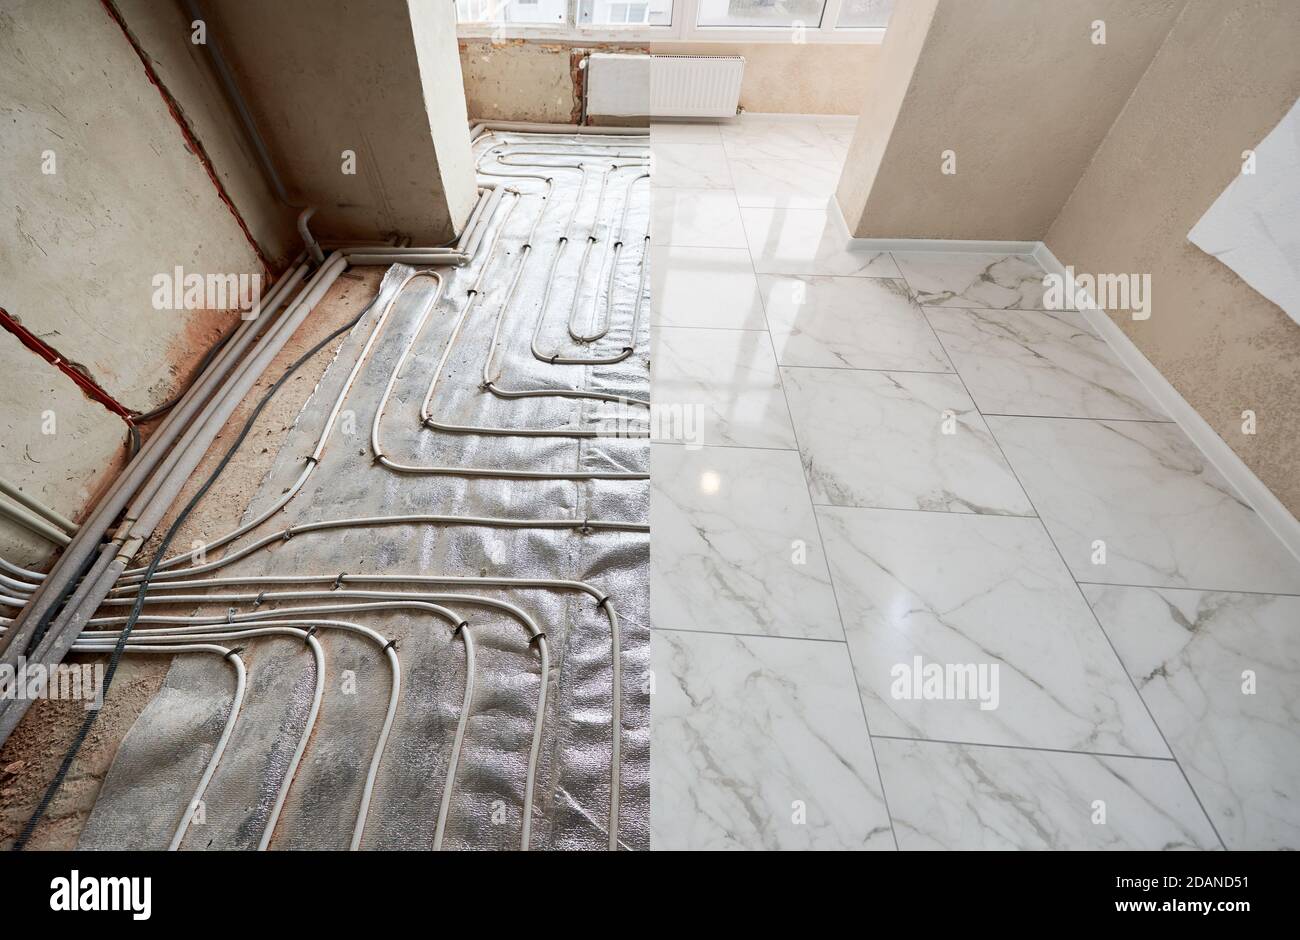 Comparison of old floor with heating pipes and new white marble flooring. Modern apartment before and after restoration or refurbishment. Concept of home renovation and restoration. Stock Photo